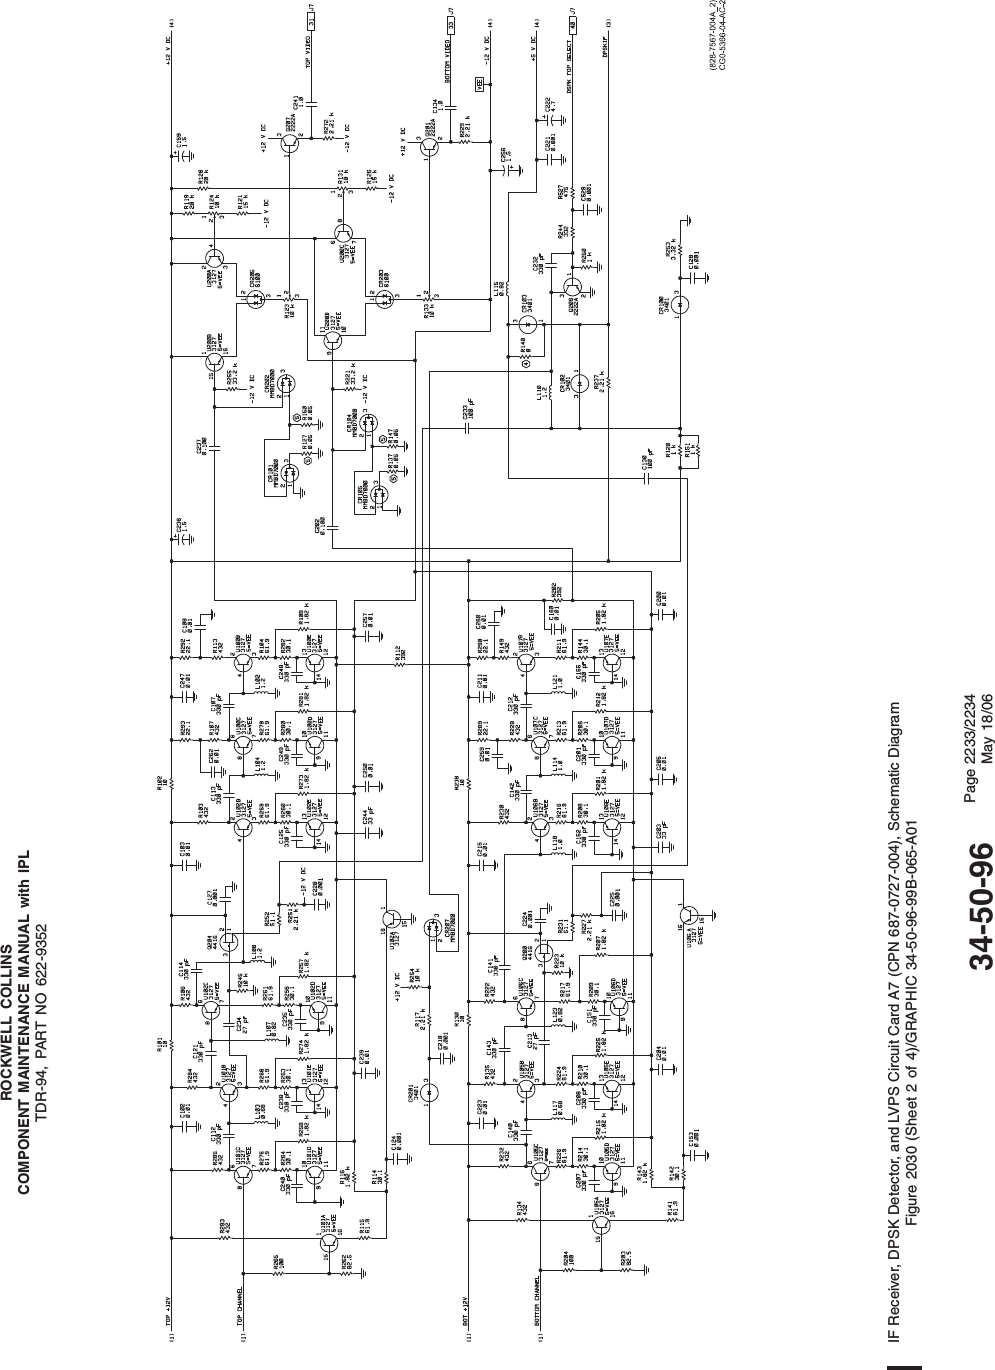 ROCKWELL COLLINSCOMPONENT MAINTENANCE MANUAL with IPLTDR-94, PART NO 622-9352IF Receiver, DPSK Detector, and LVPS Circuit Card A7 (CPN 687-0727-004), Schematic DiagramFigure 2030 (Sheet 2 of 4)/GRAPHIC 34-50-96-99B-065-A0134-50-96 Page 2233/2234May 18/06